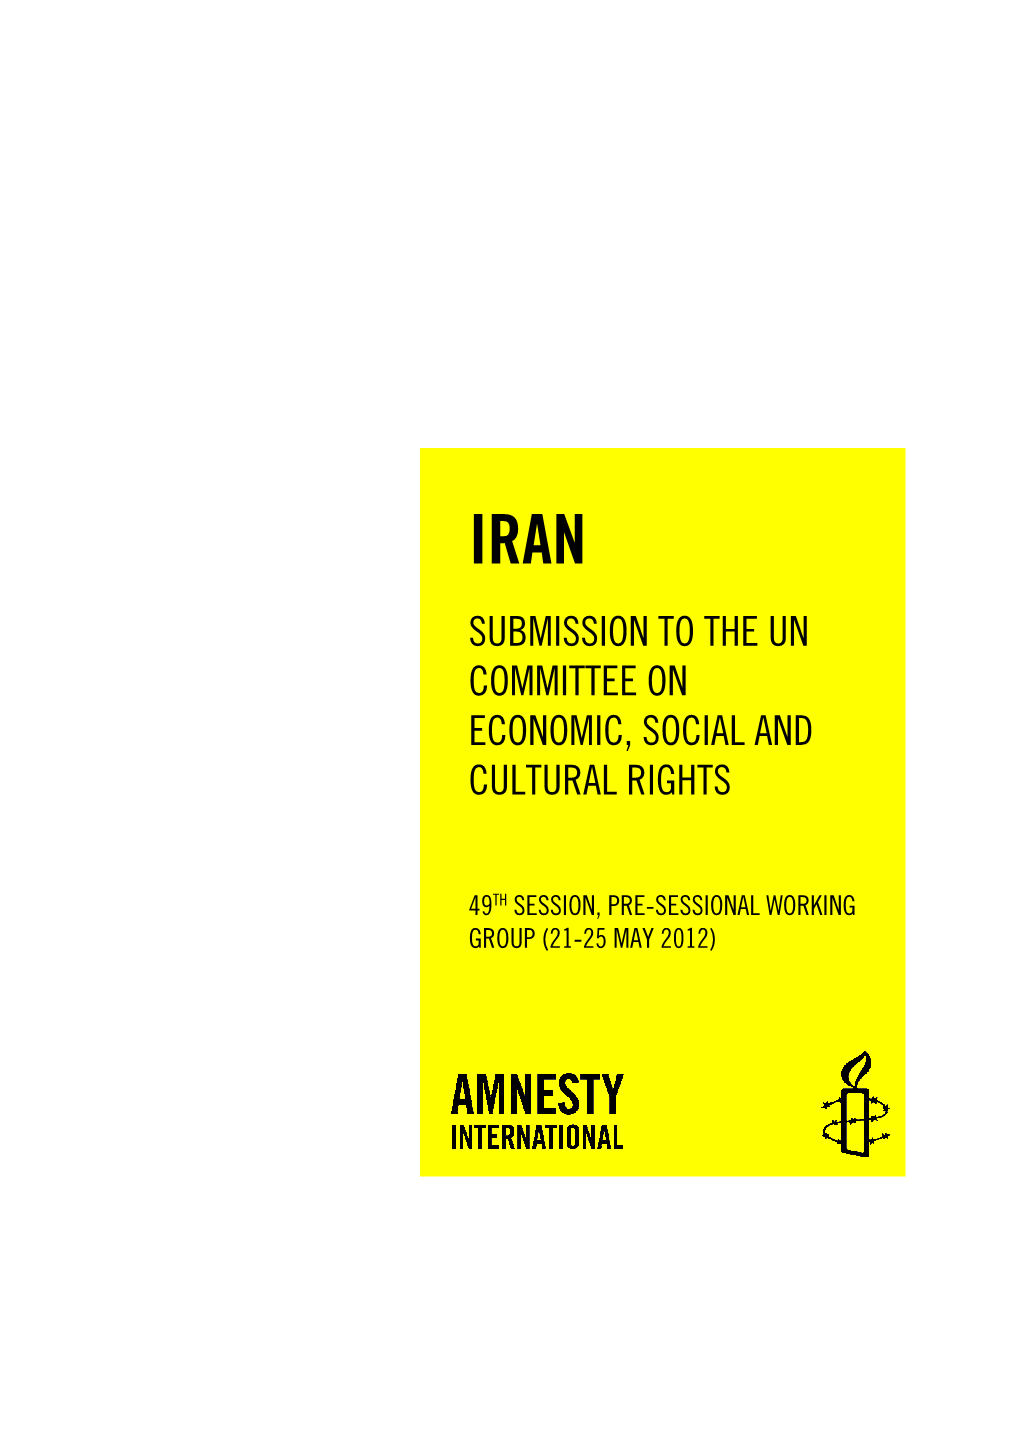 Iran Submission to the Un Committee on Economic, Social and Cultural Rights